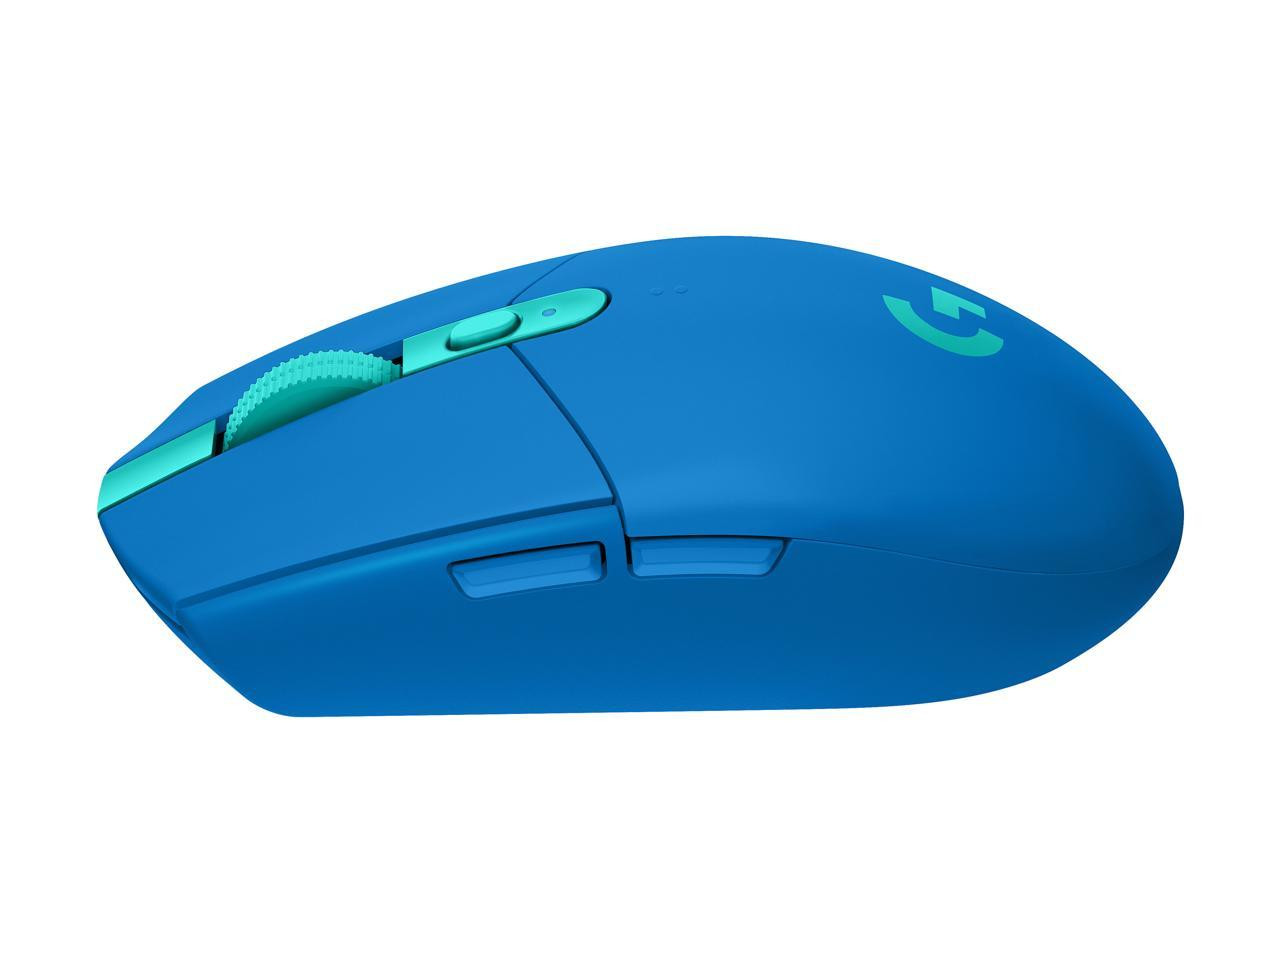 Logitech G305 Lightspeed Wireless Gaming Mouse with 6-Programmable